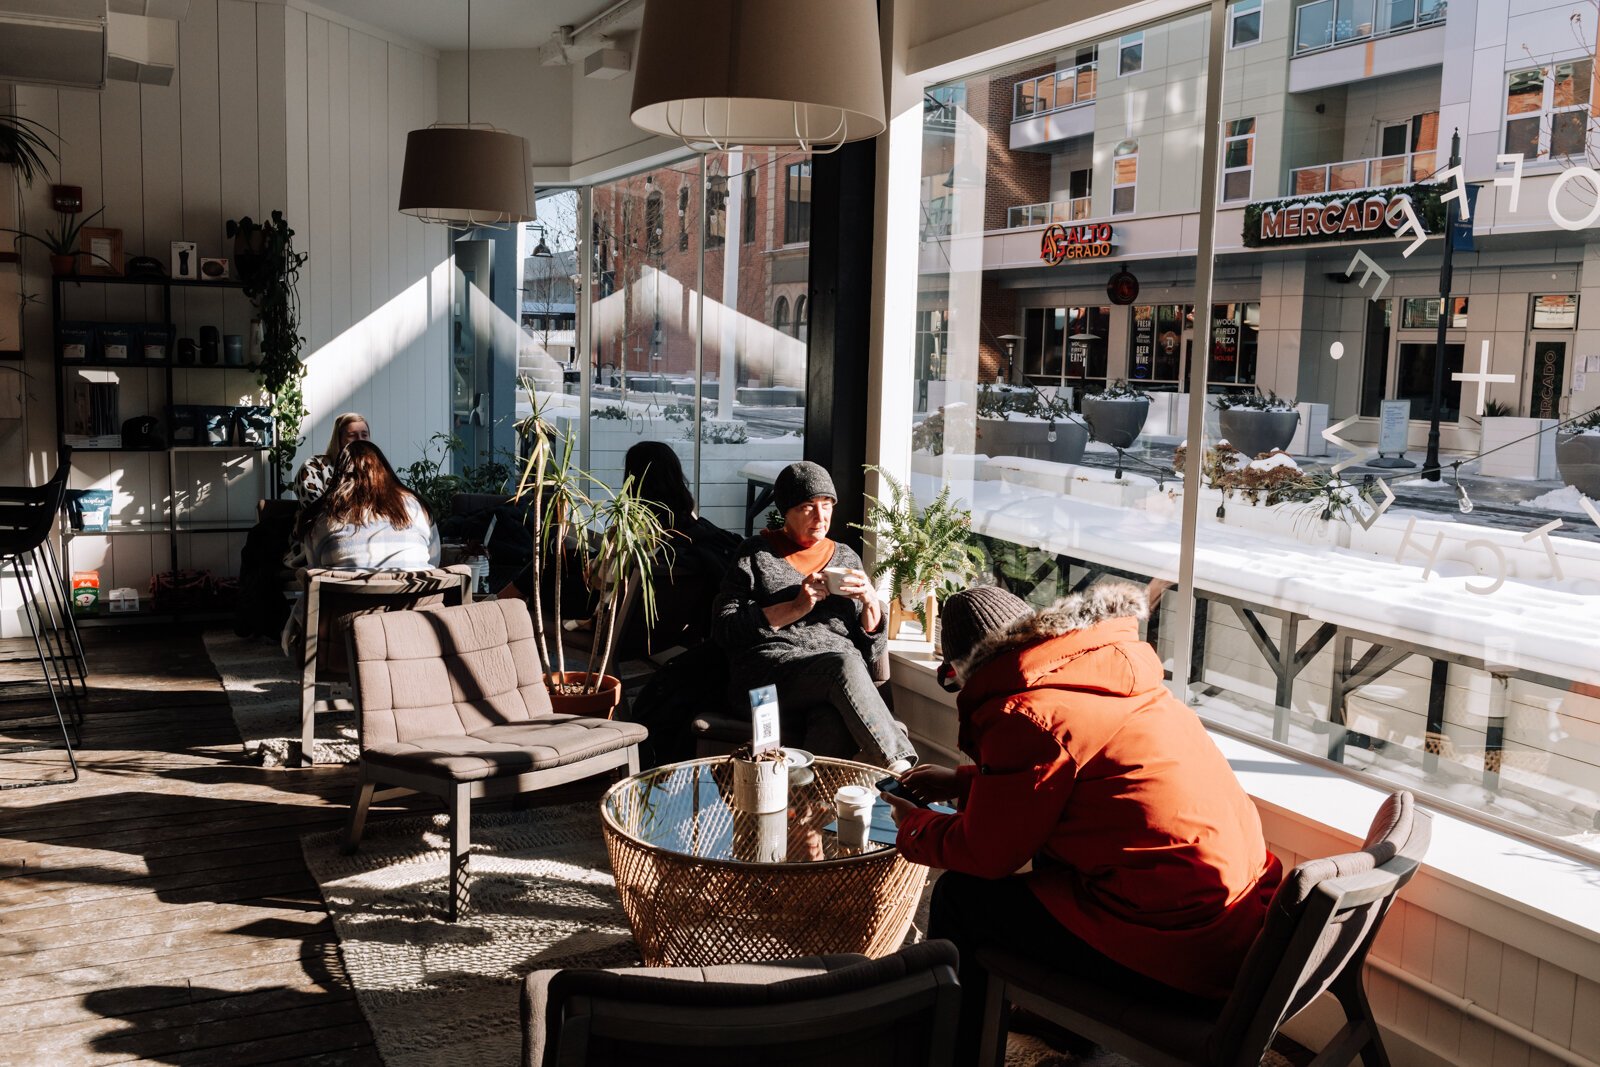 Guests enjoy the natural light at Utopian Coffee.